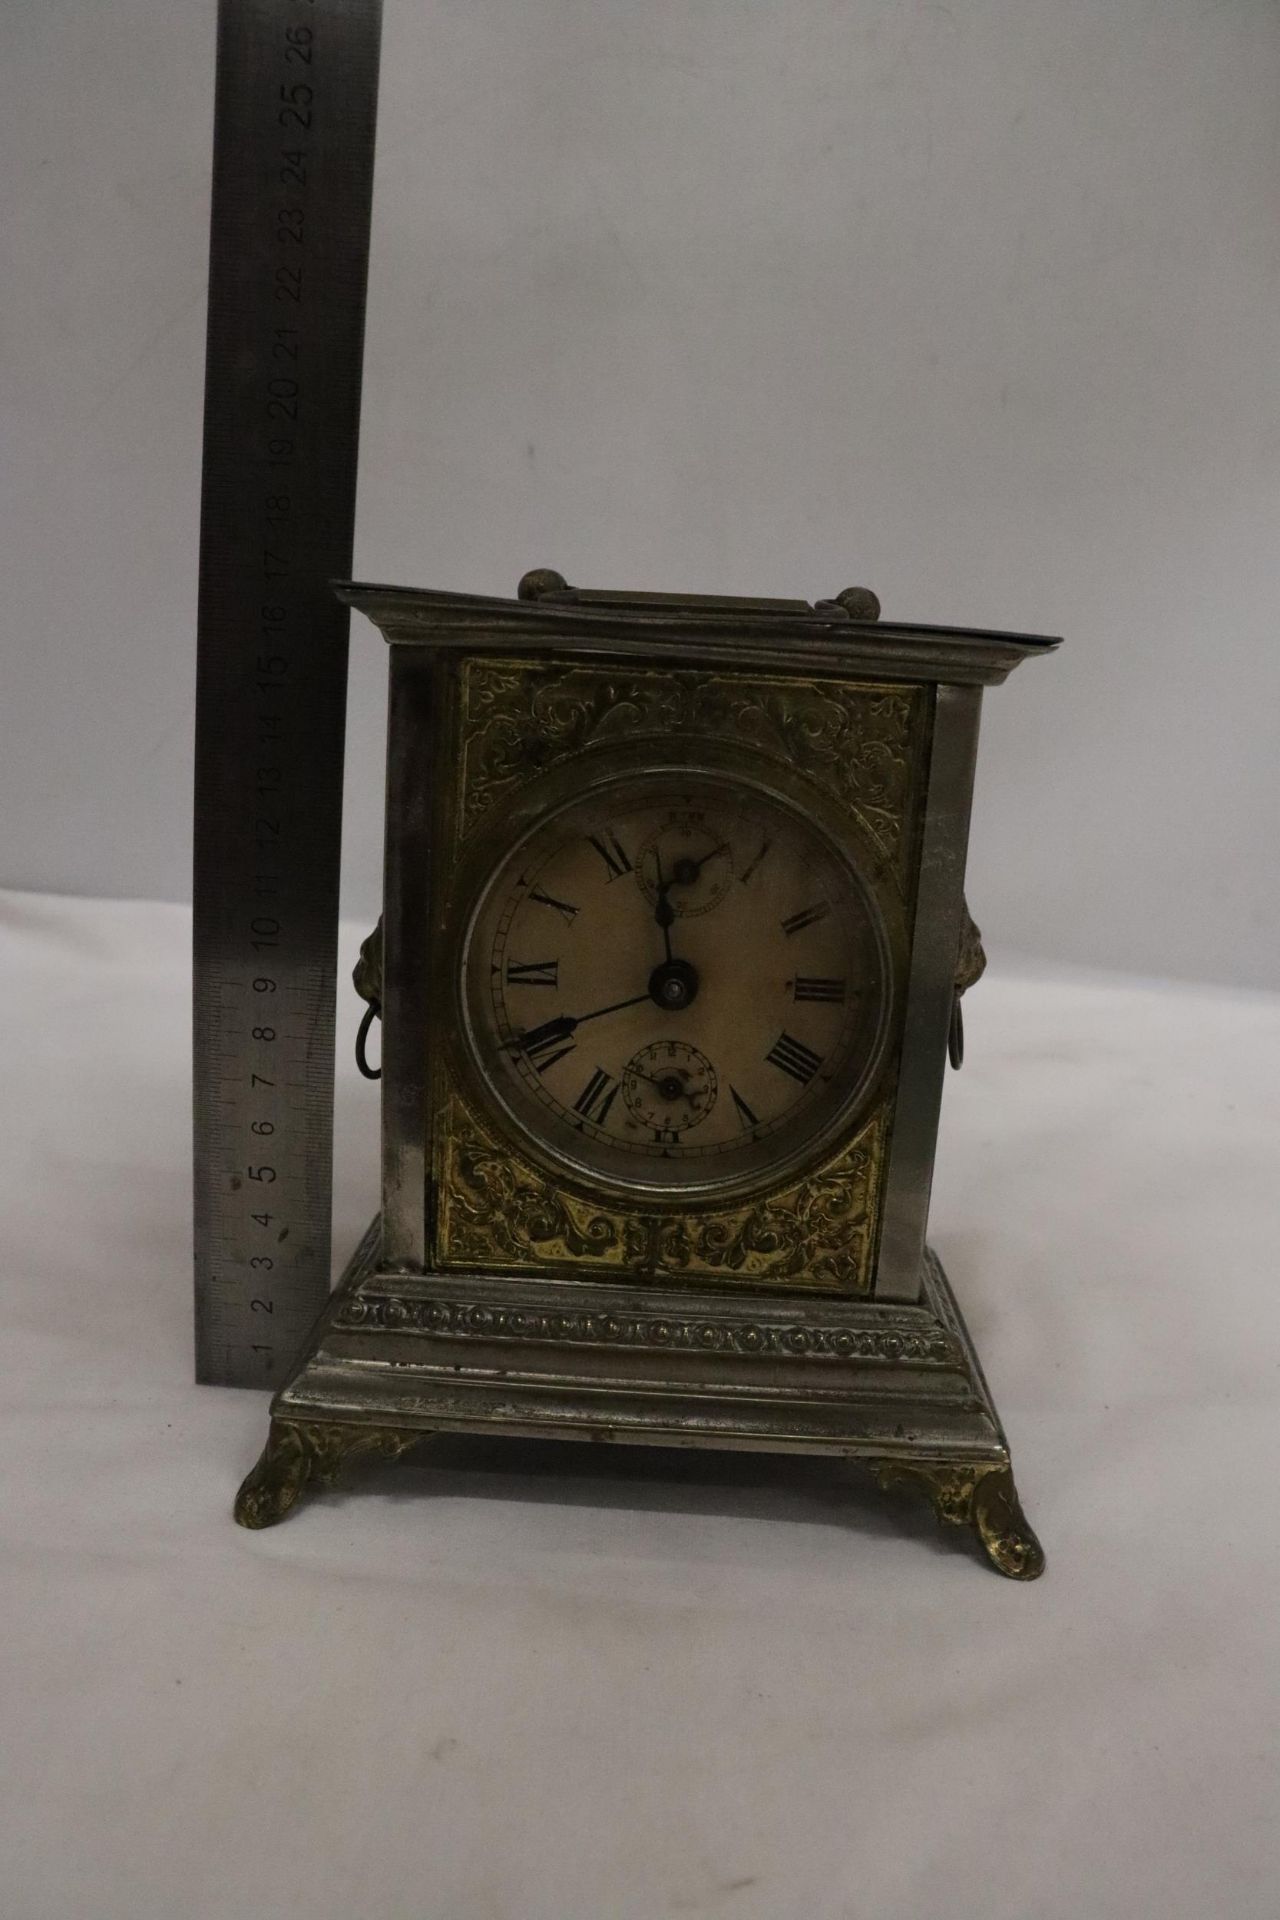 AN ORNATE VINTAGE ALARM CARRIAGE CLOCK WITH LION HANDLE DECORATION TO THE SIDES - POSSIBLY AN - Image 8 of 9